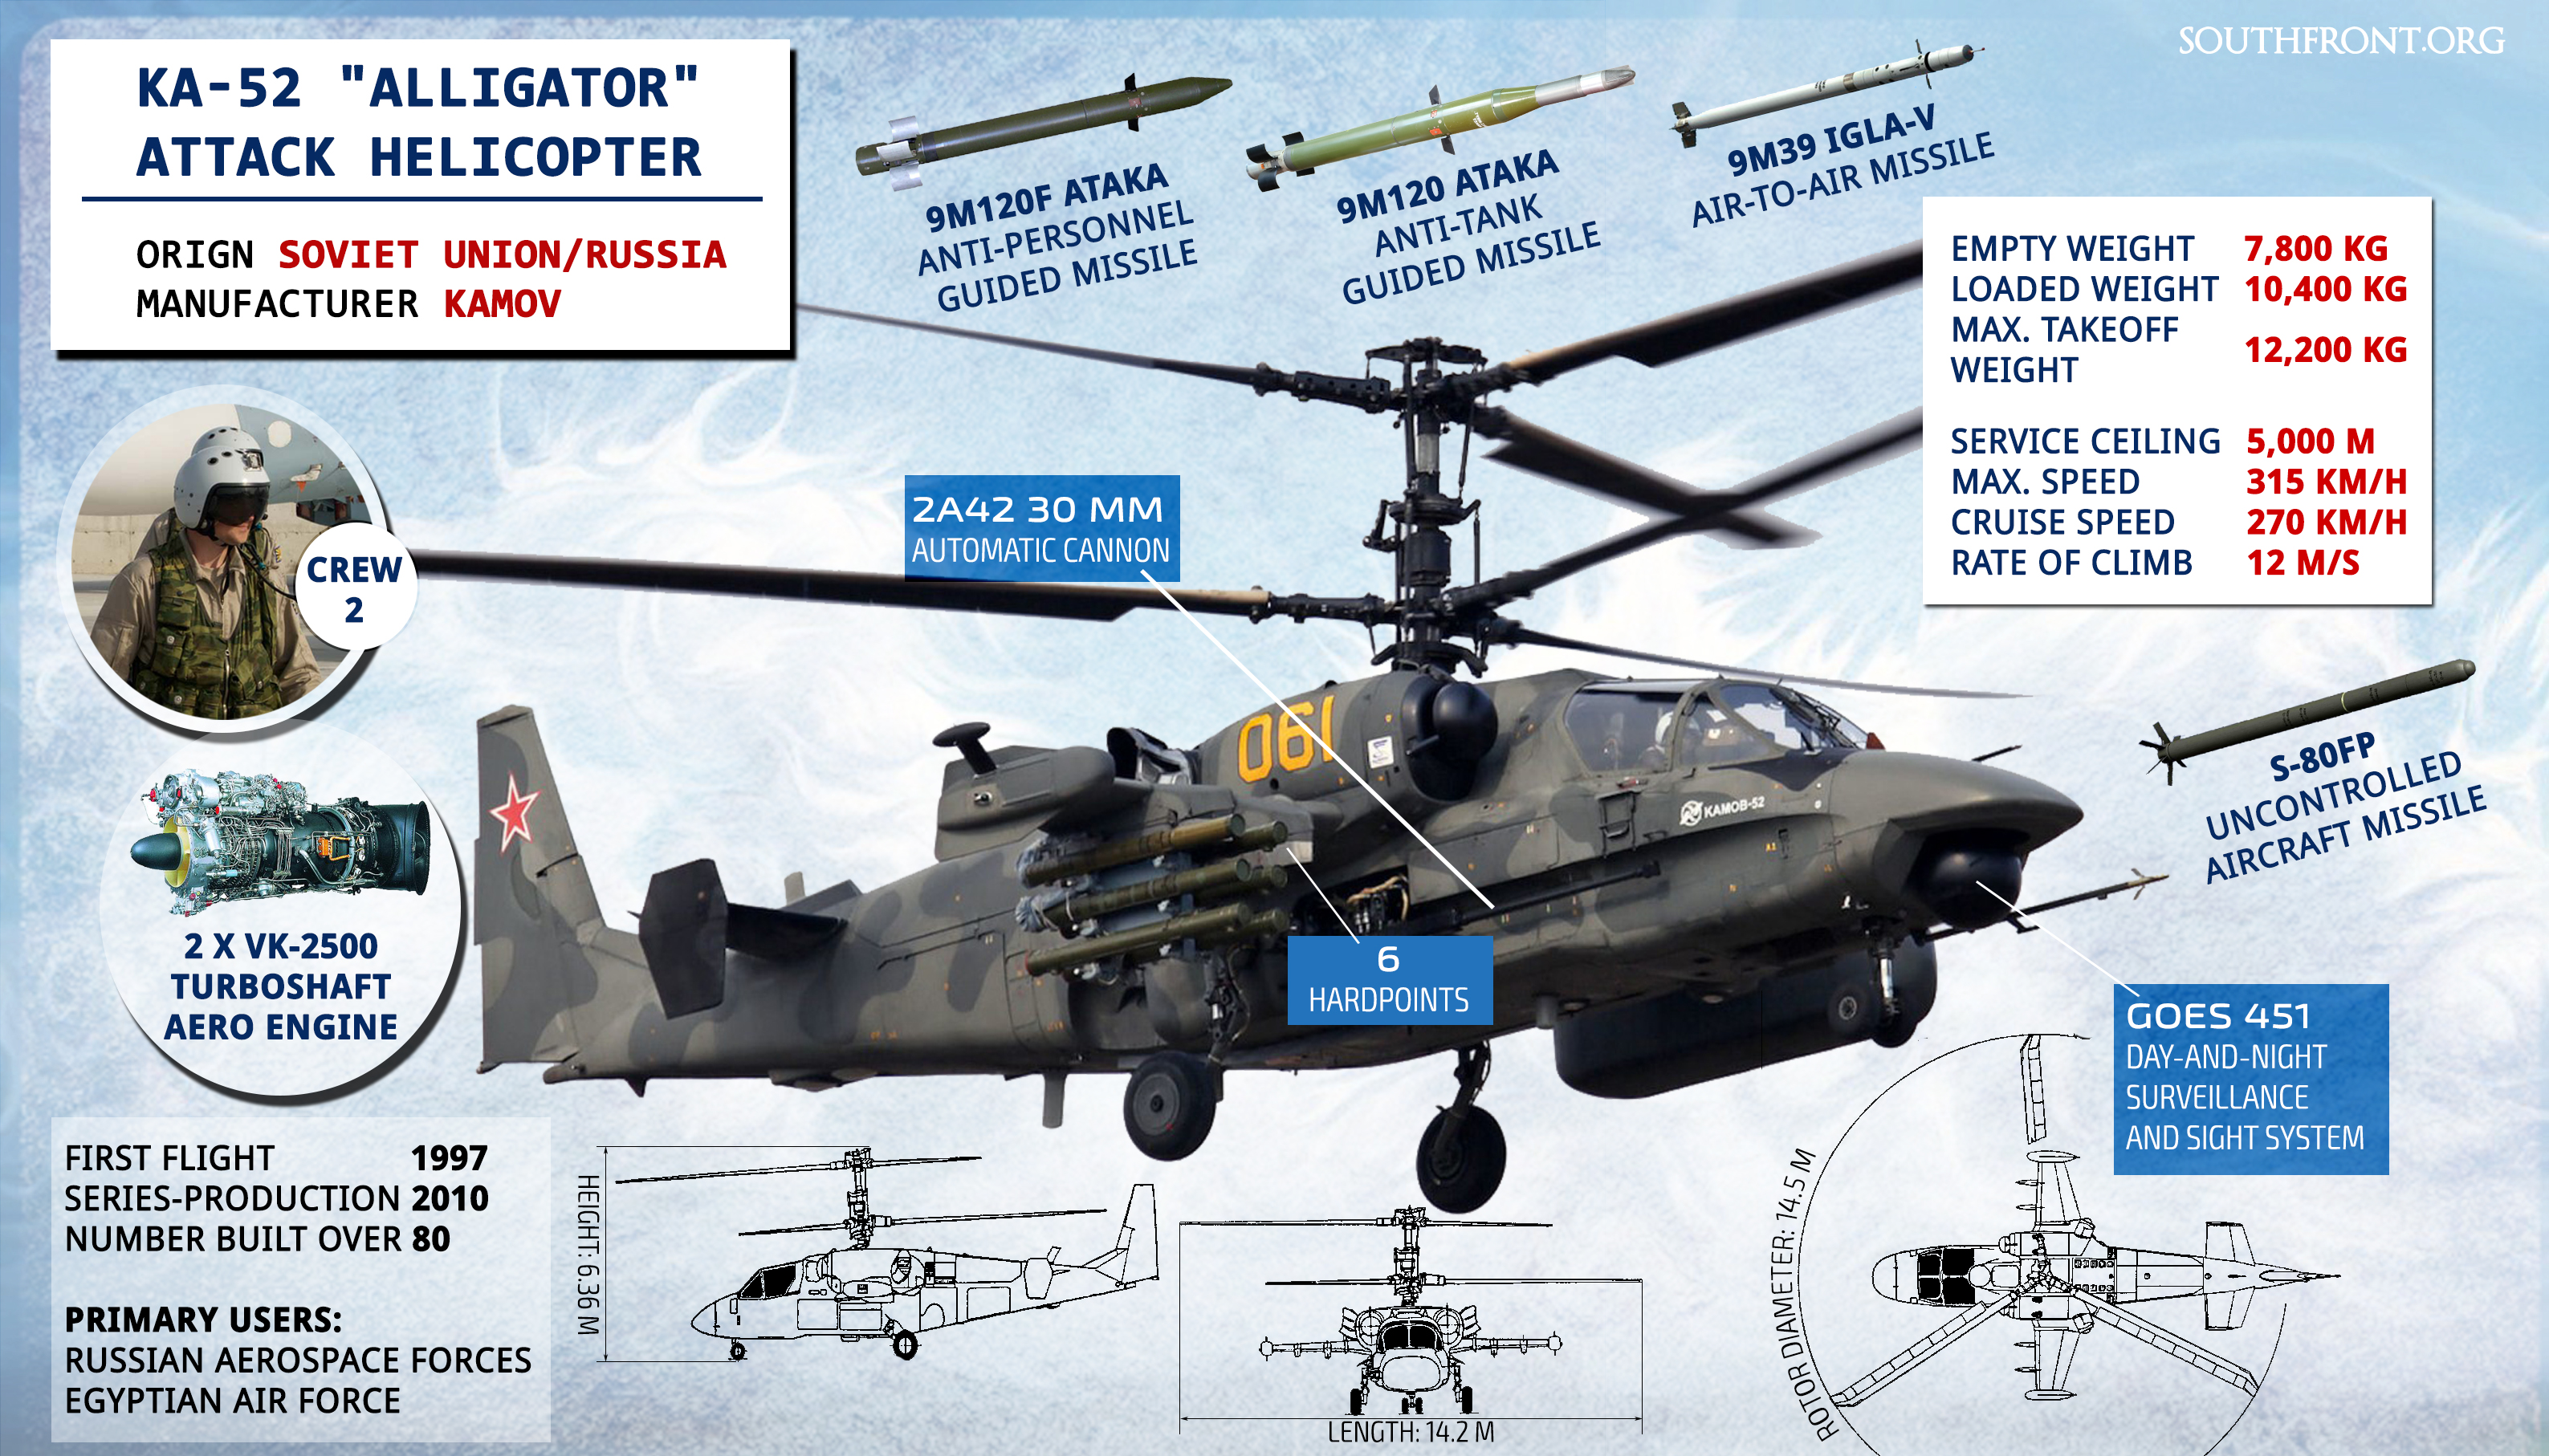 Russian Ka-52 Attack Helicopters Hunt Down Ukrainian Forces With Laser-Guided Missiles (Videos)